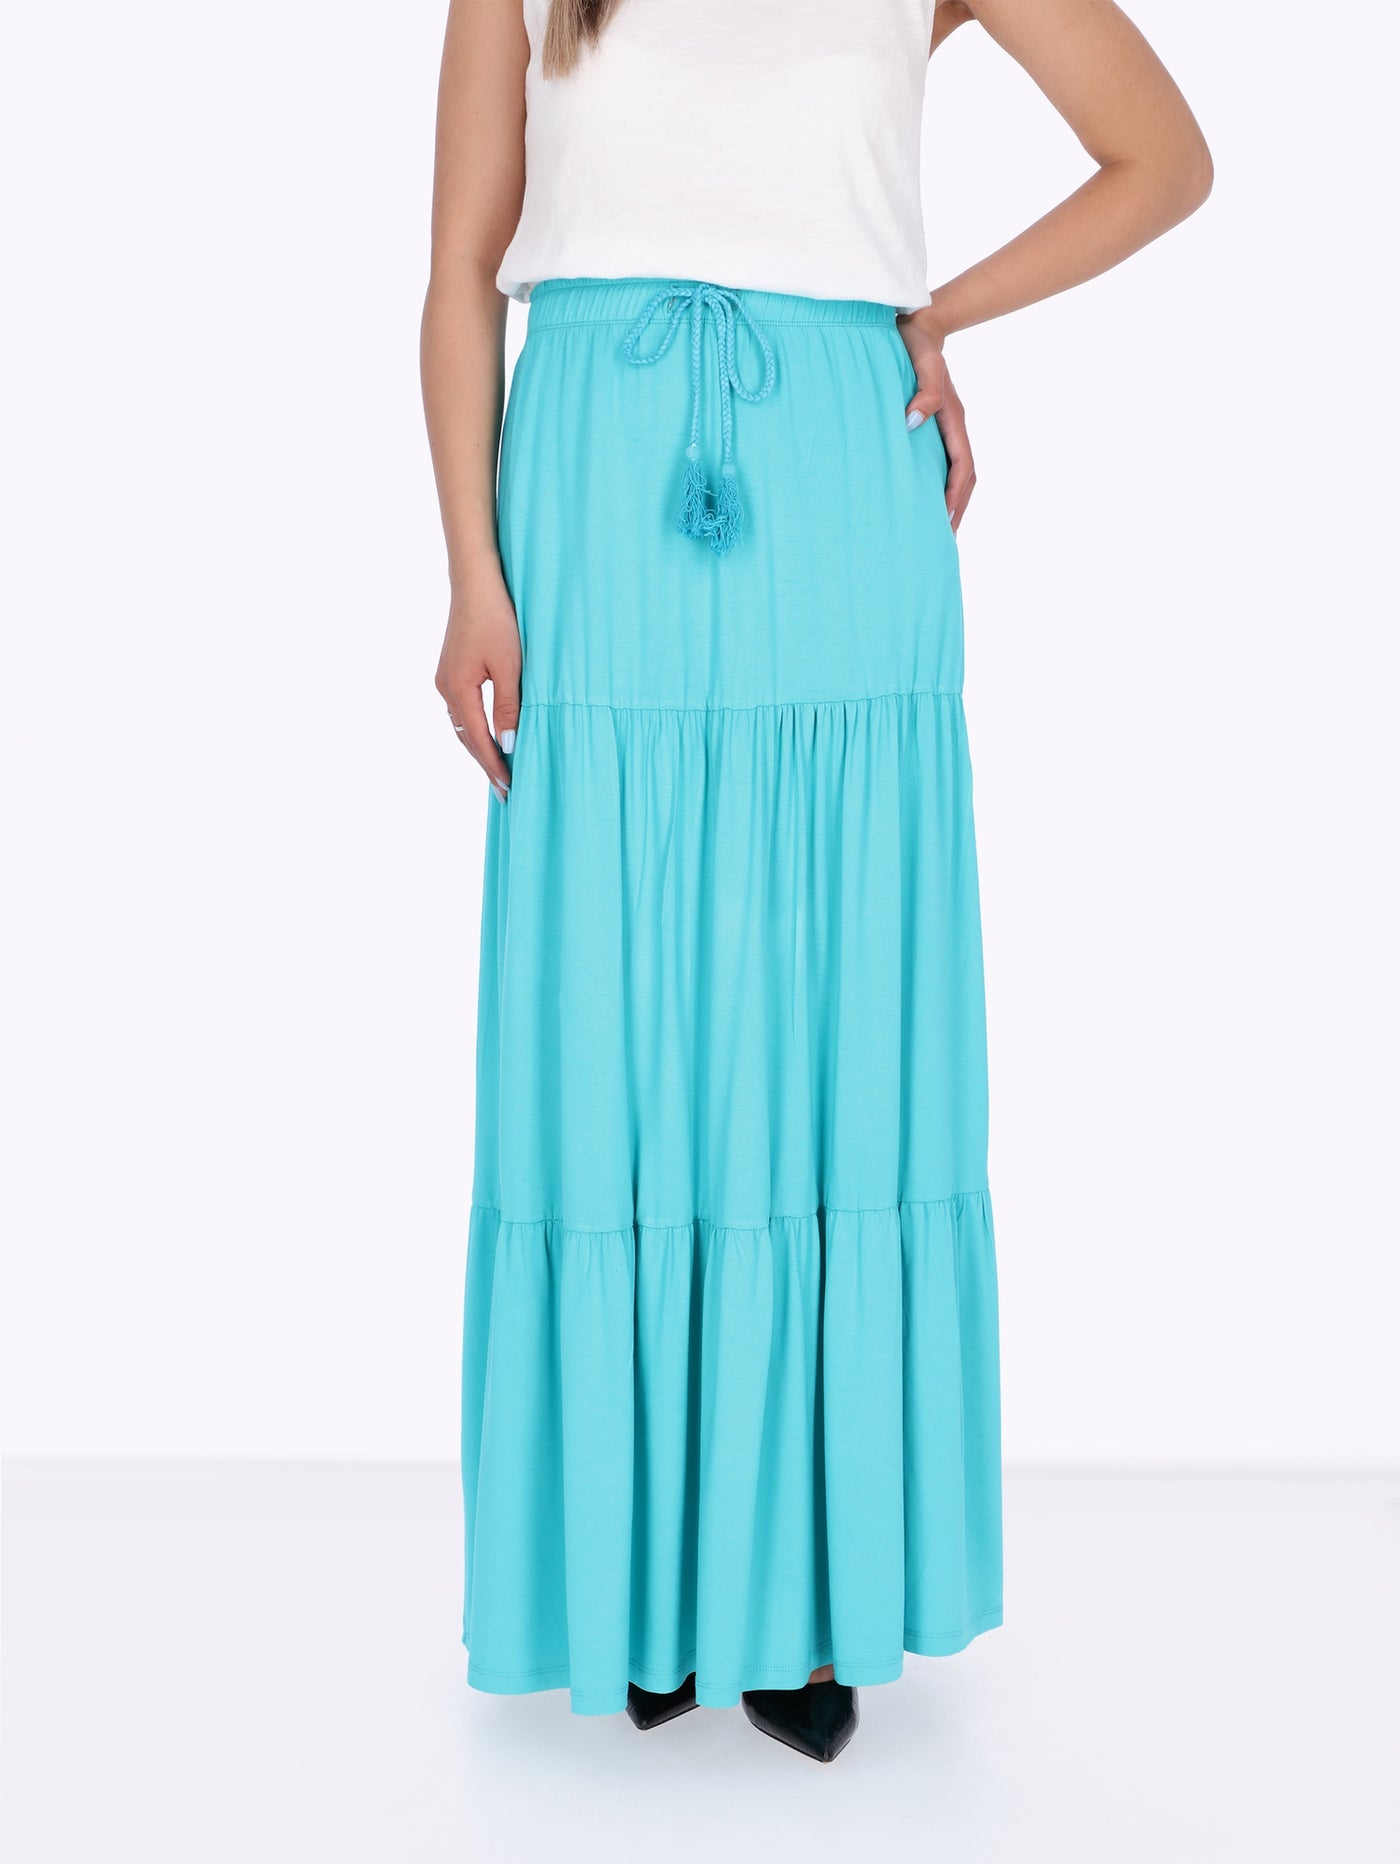 OR Women's Drawstring Tiered Maxi Skirt